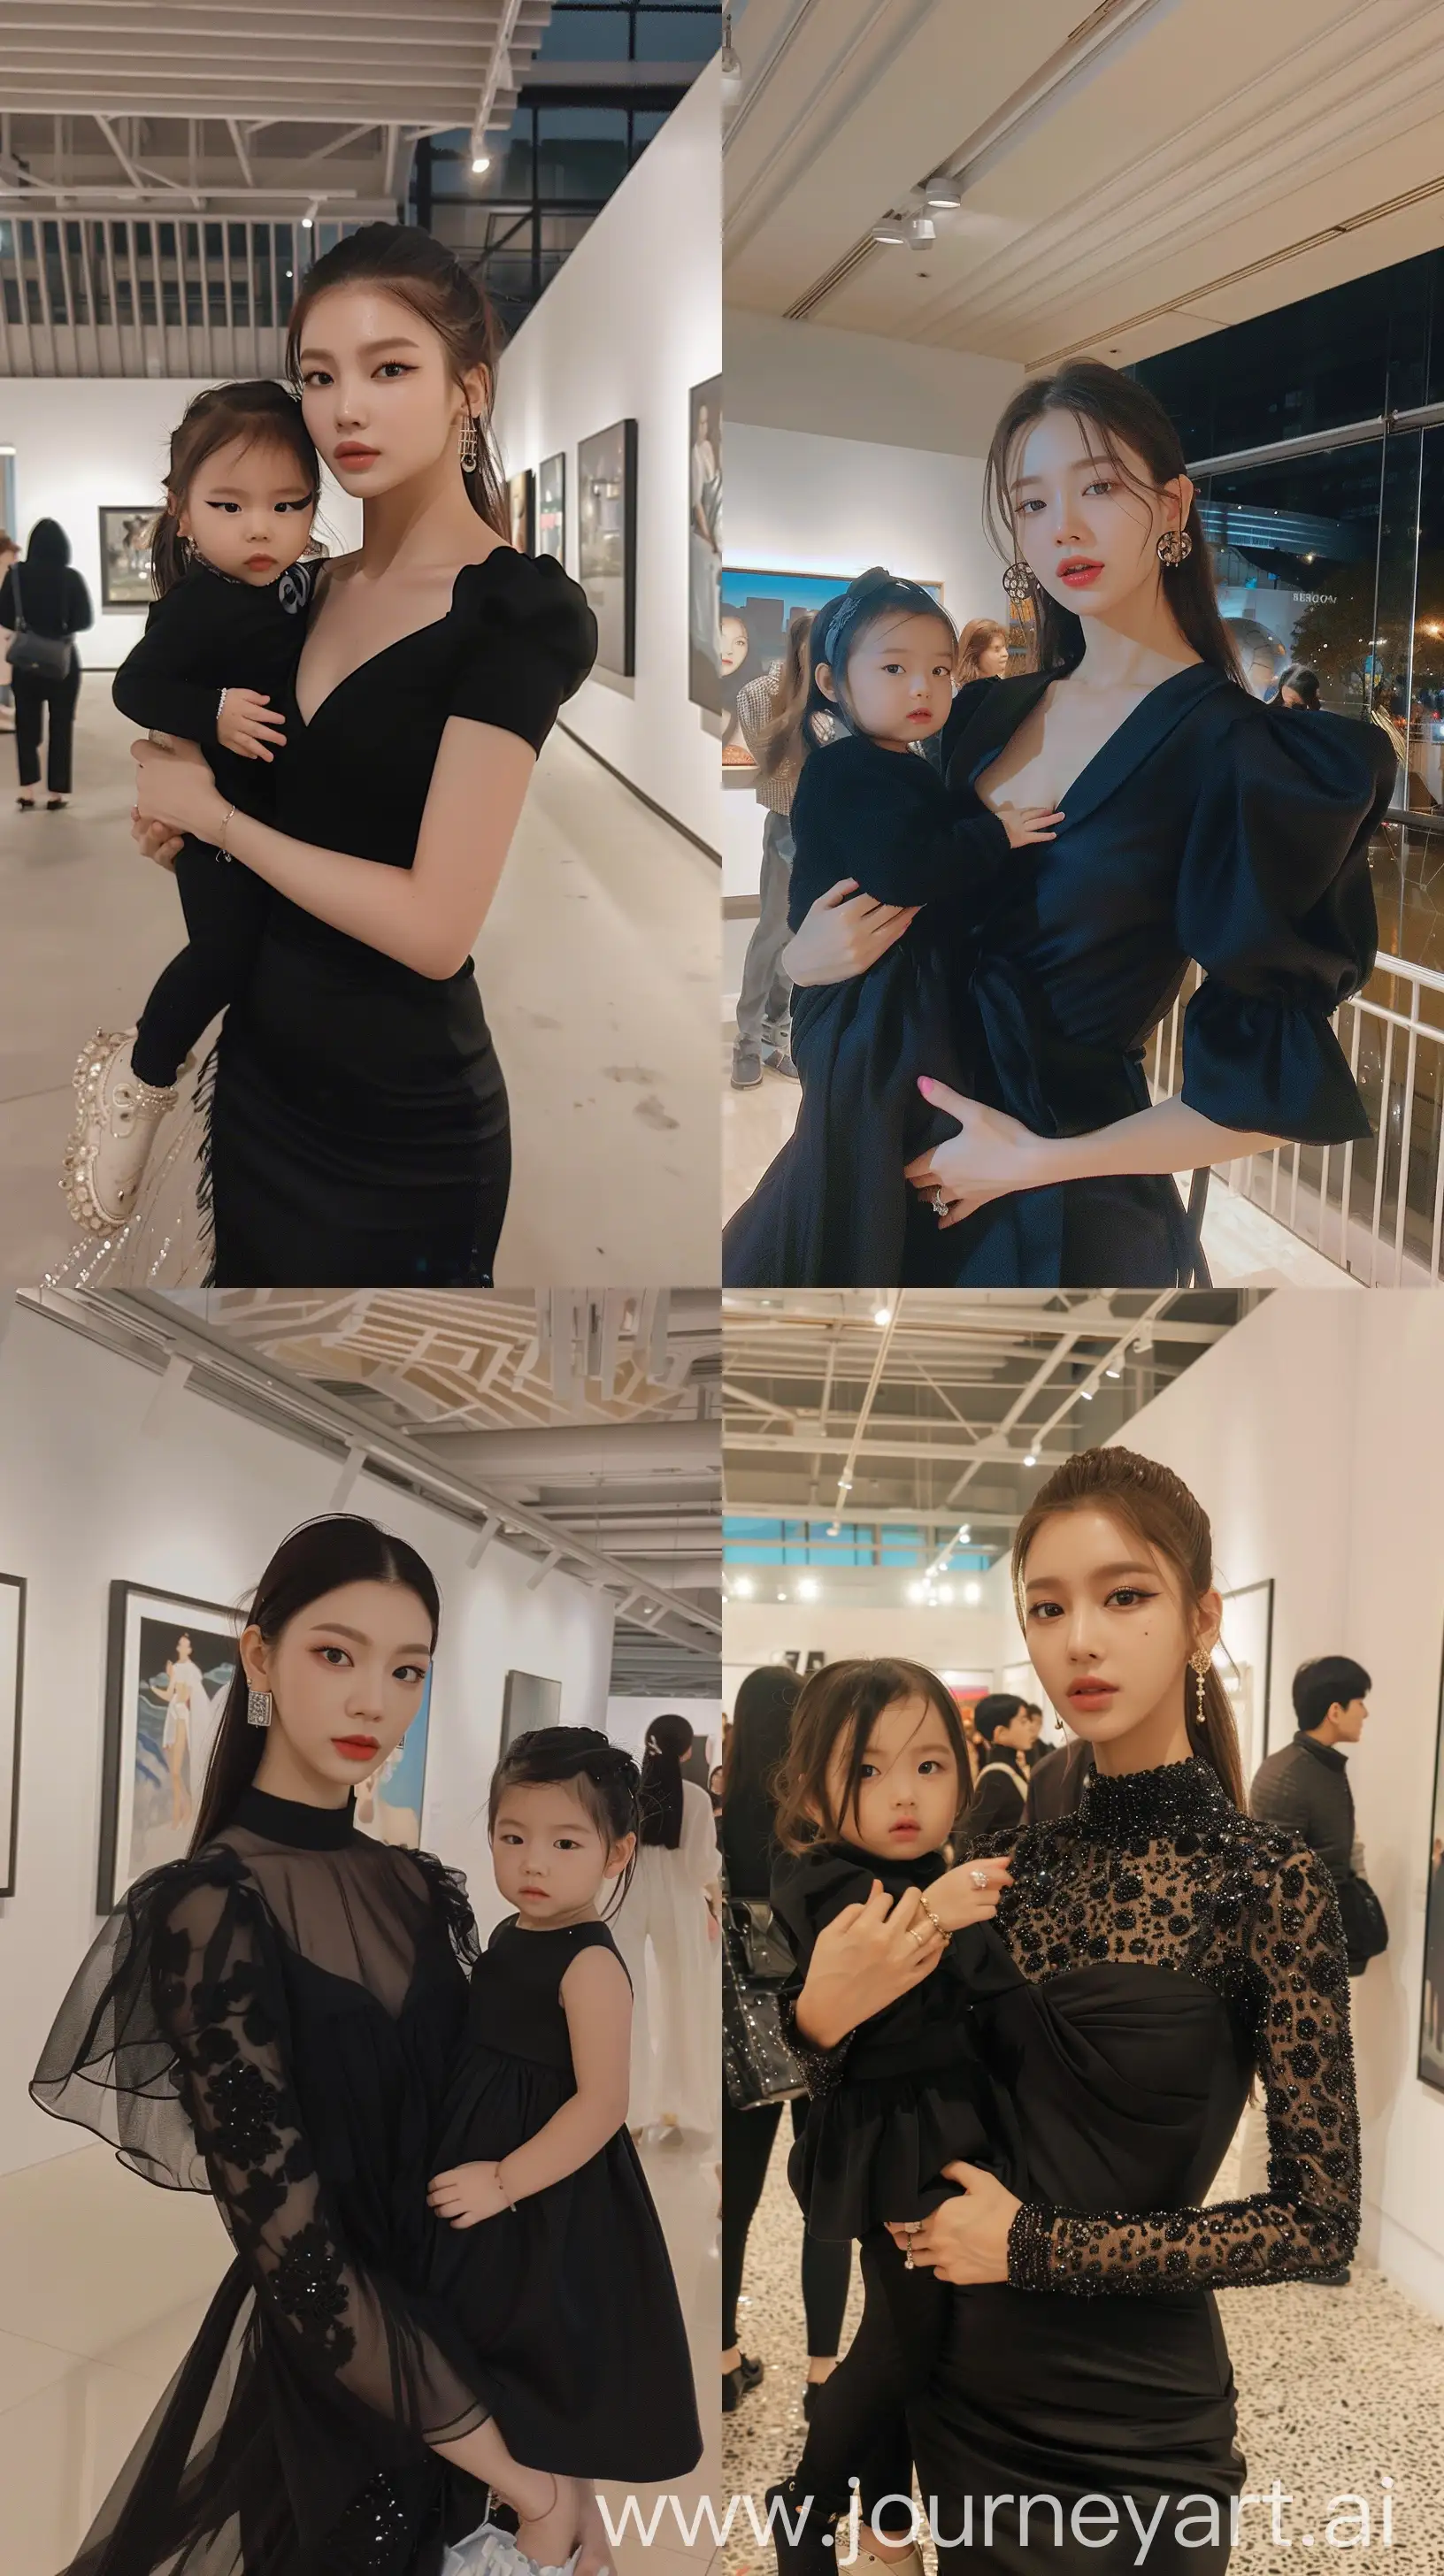 Blackpinks-Jennie-Holding-Aesthetic-Selfie-with-Toddler-at-Modern-Art-Exhibition